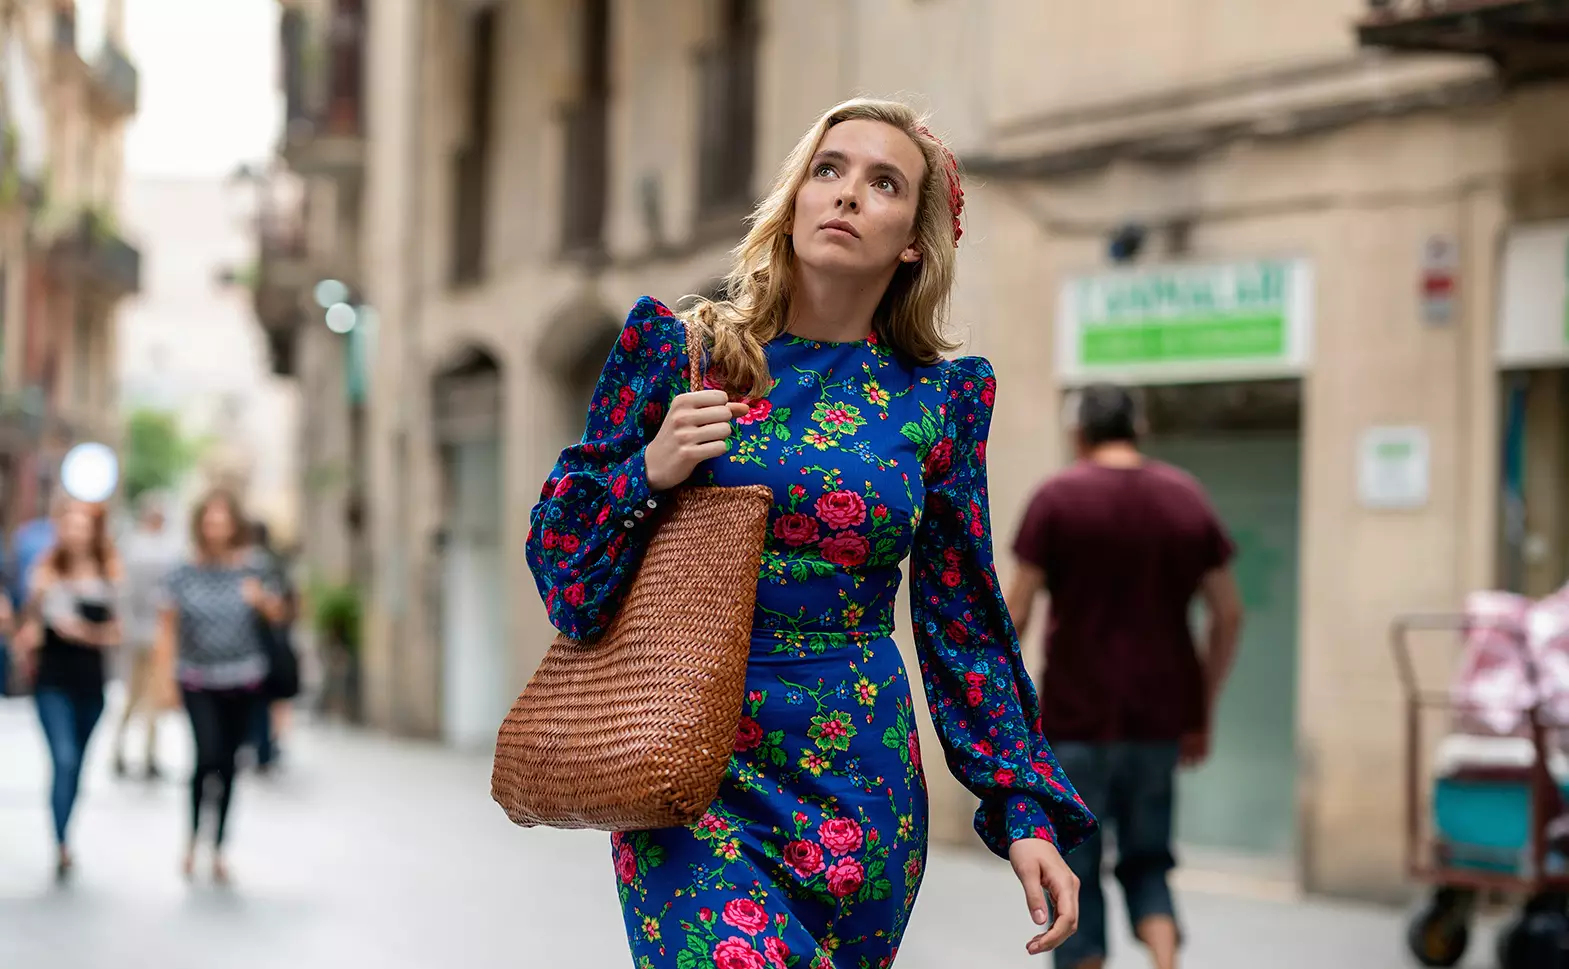 Villanelle is starting a new life in Barcelona (